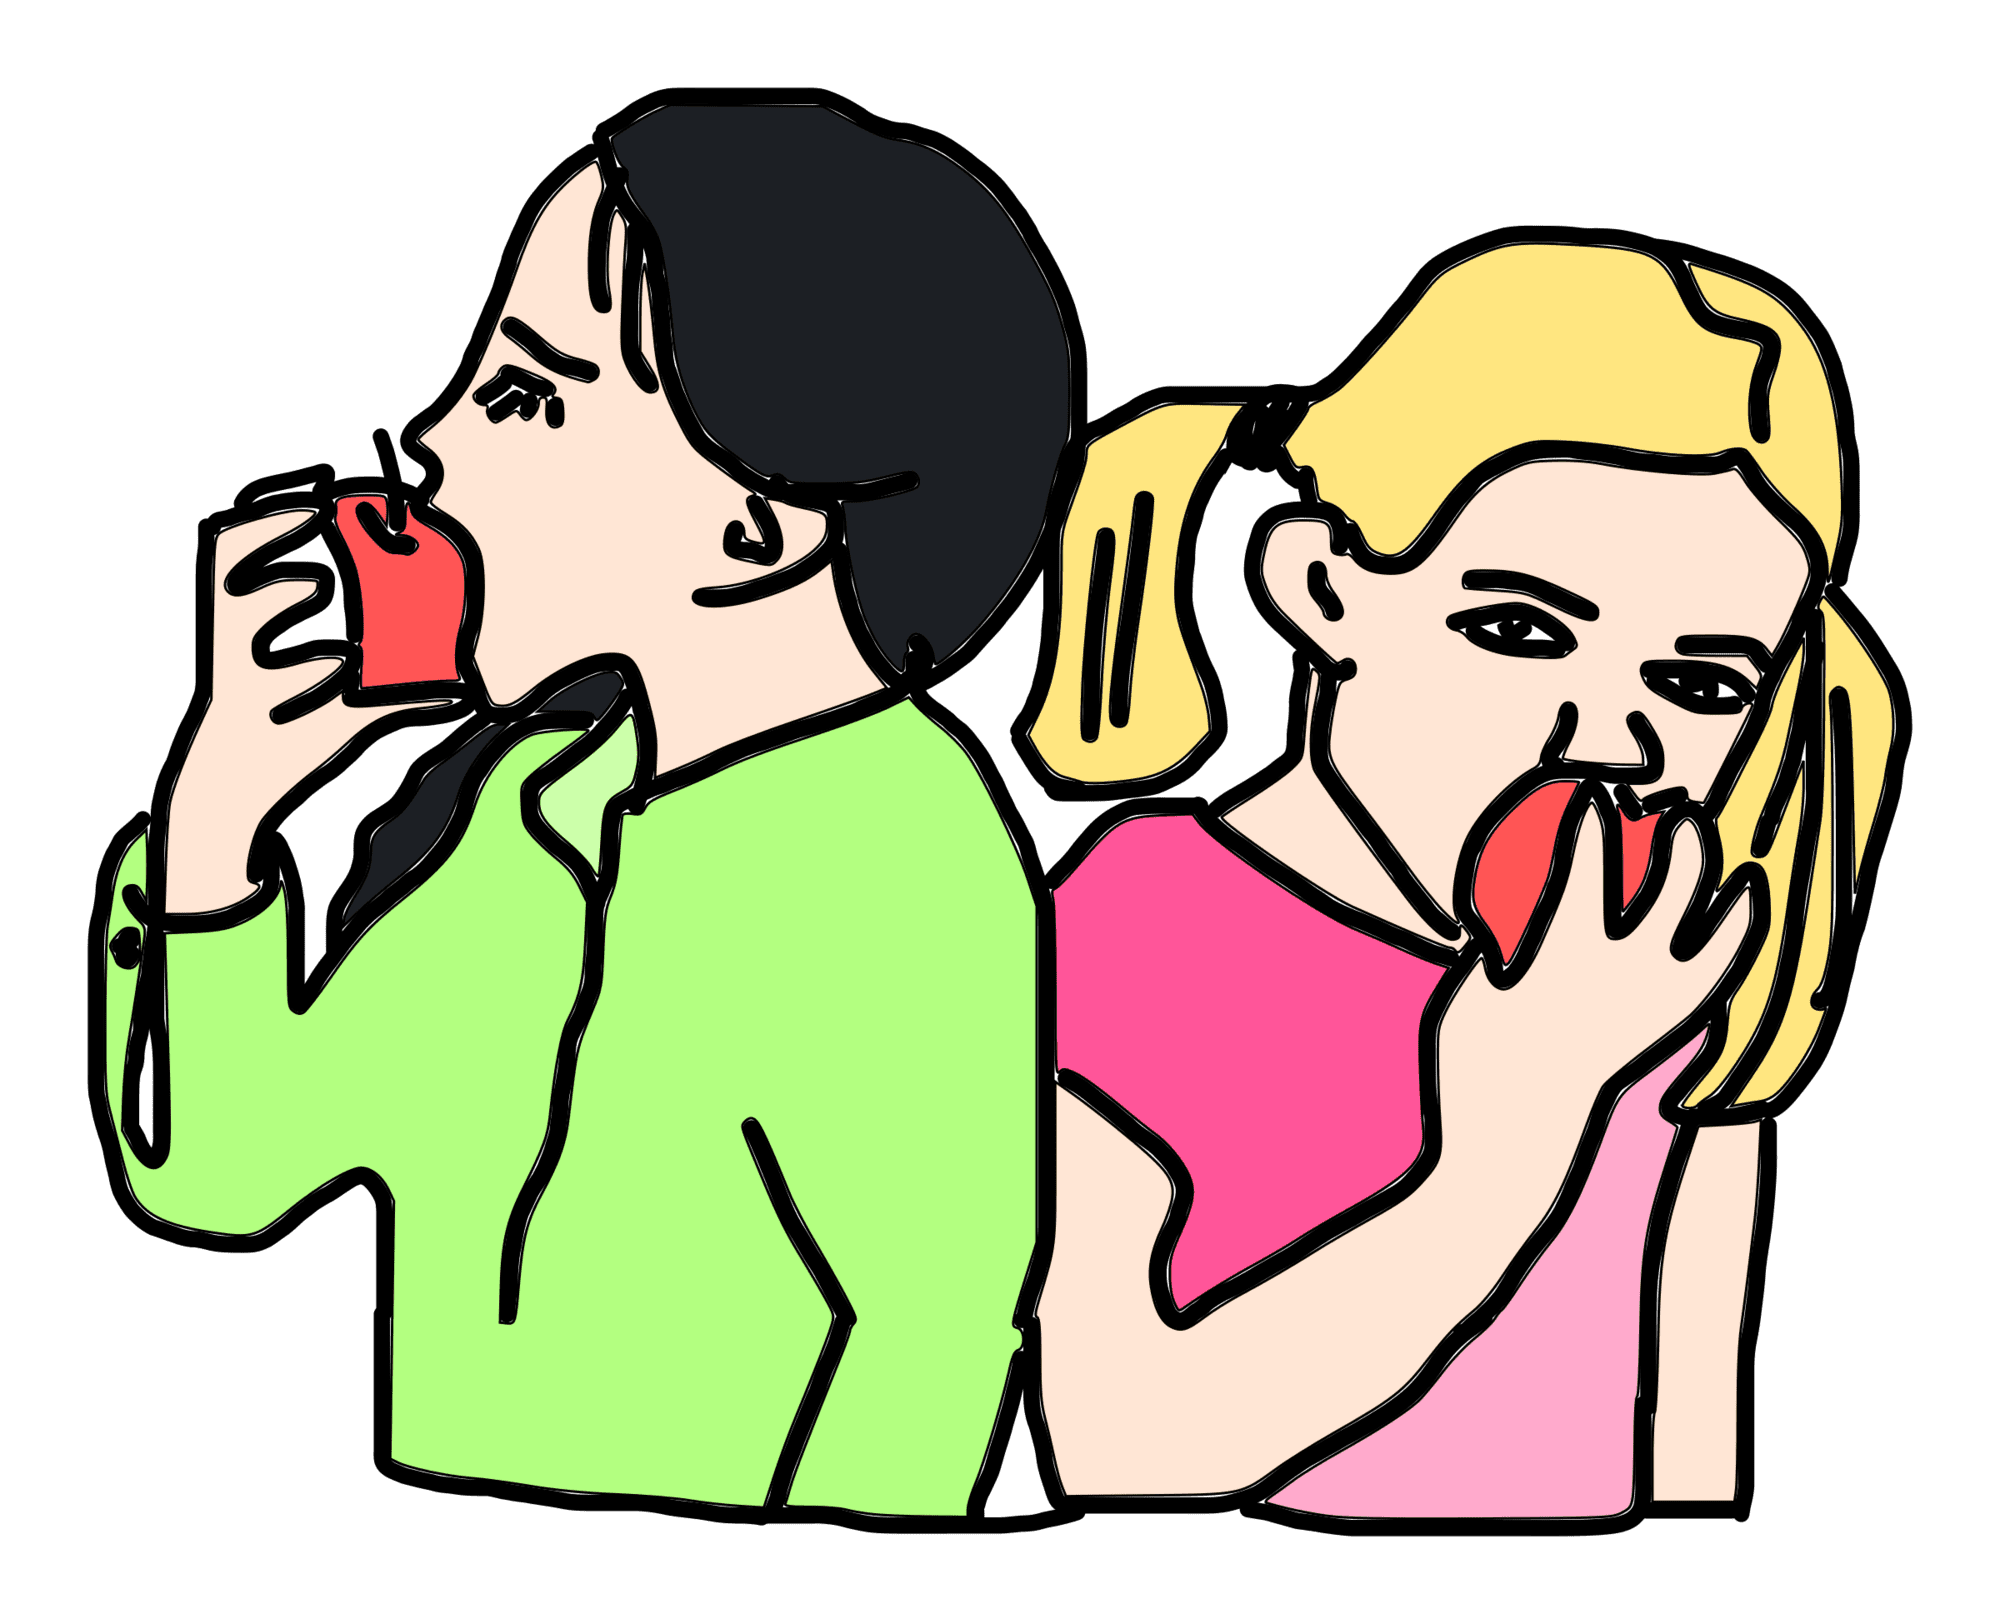 Girls eating apples vector clipart image photo